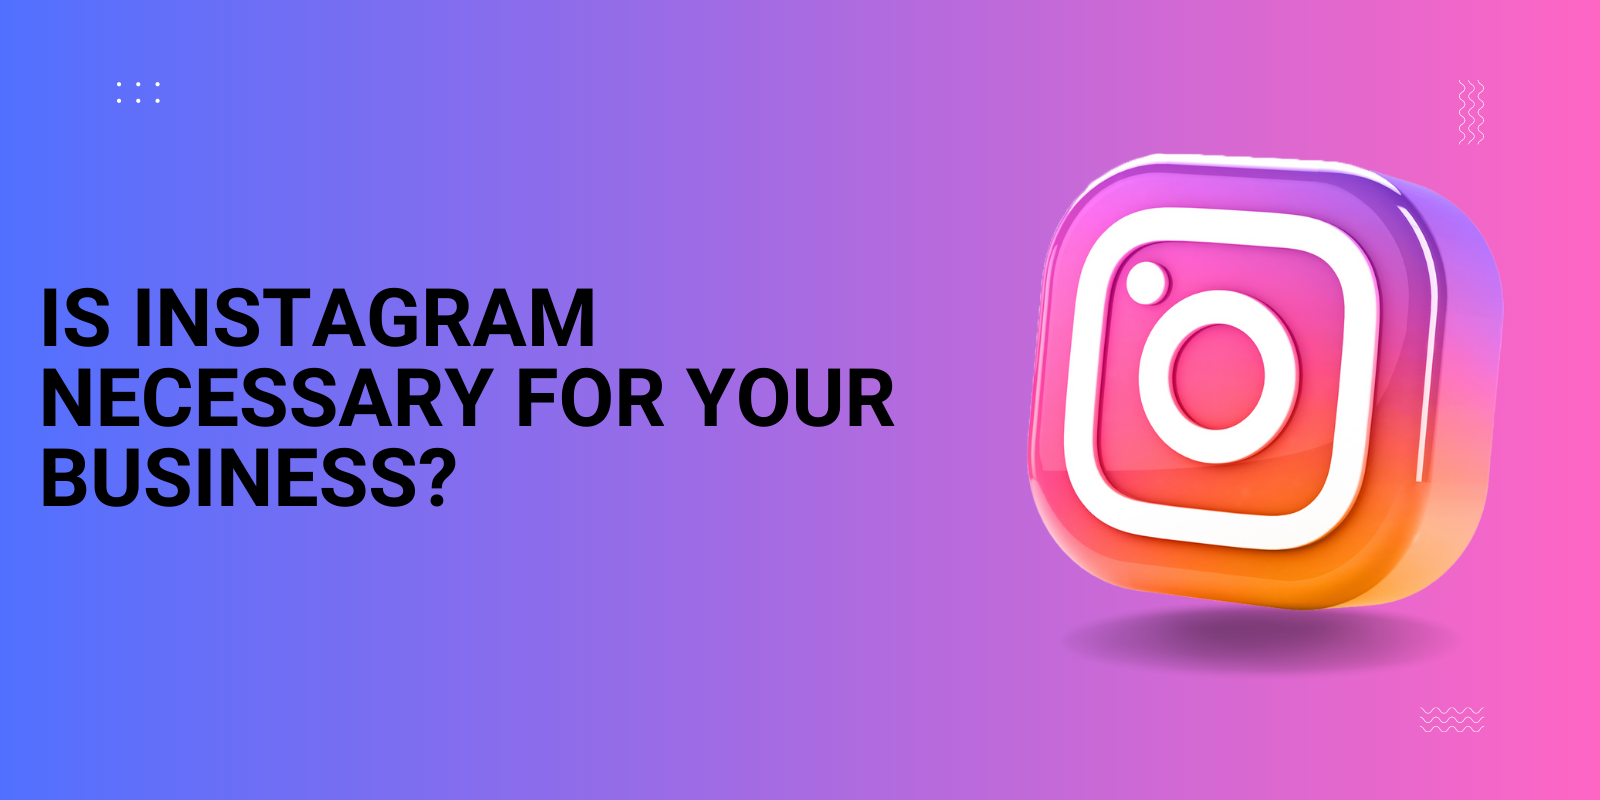 How to create an Instagram page - Do's and Don'ts